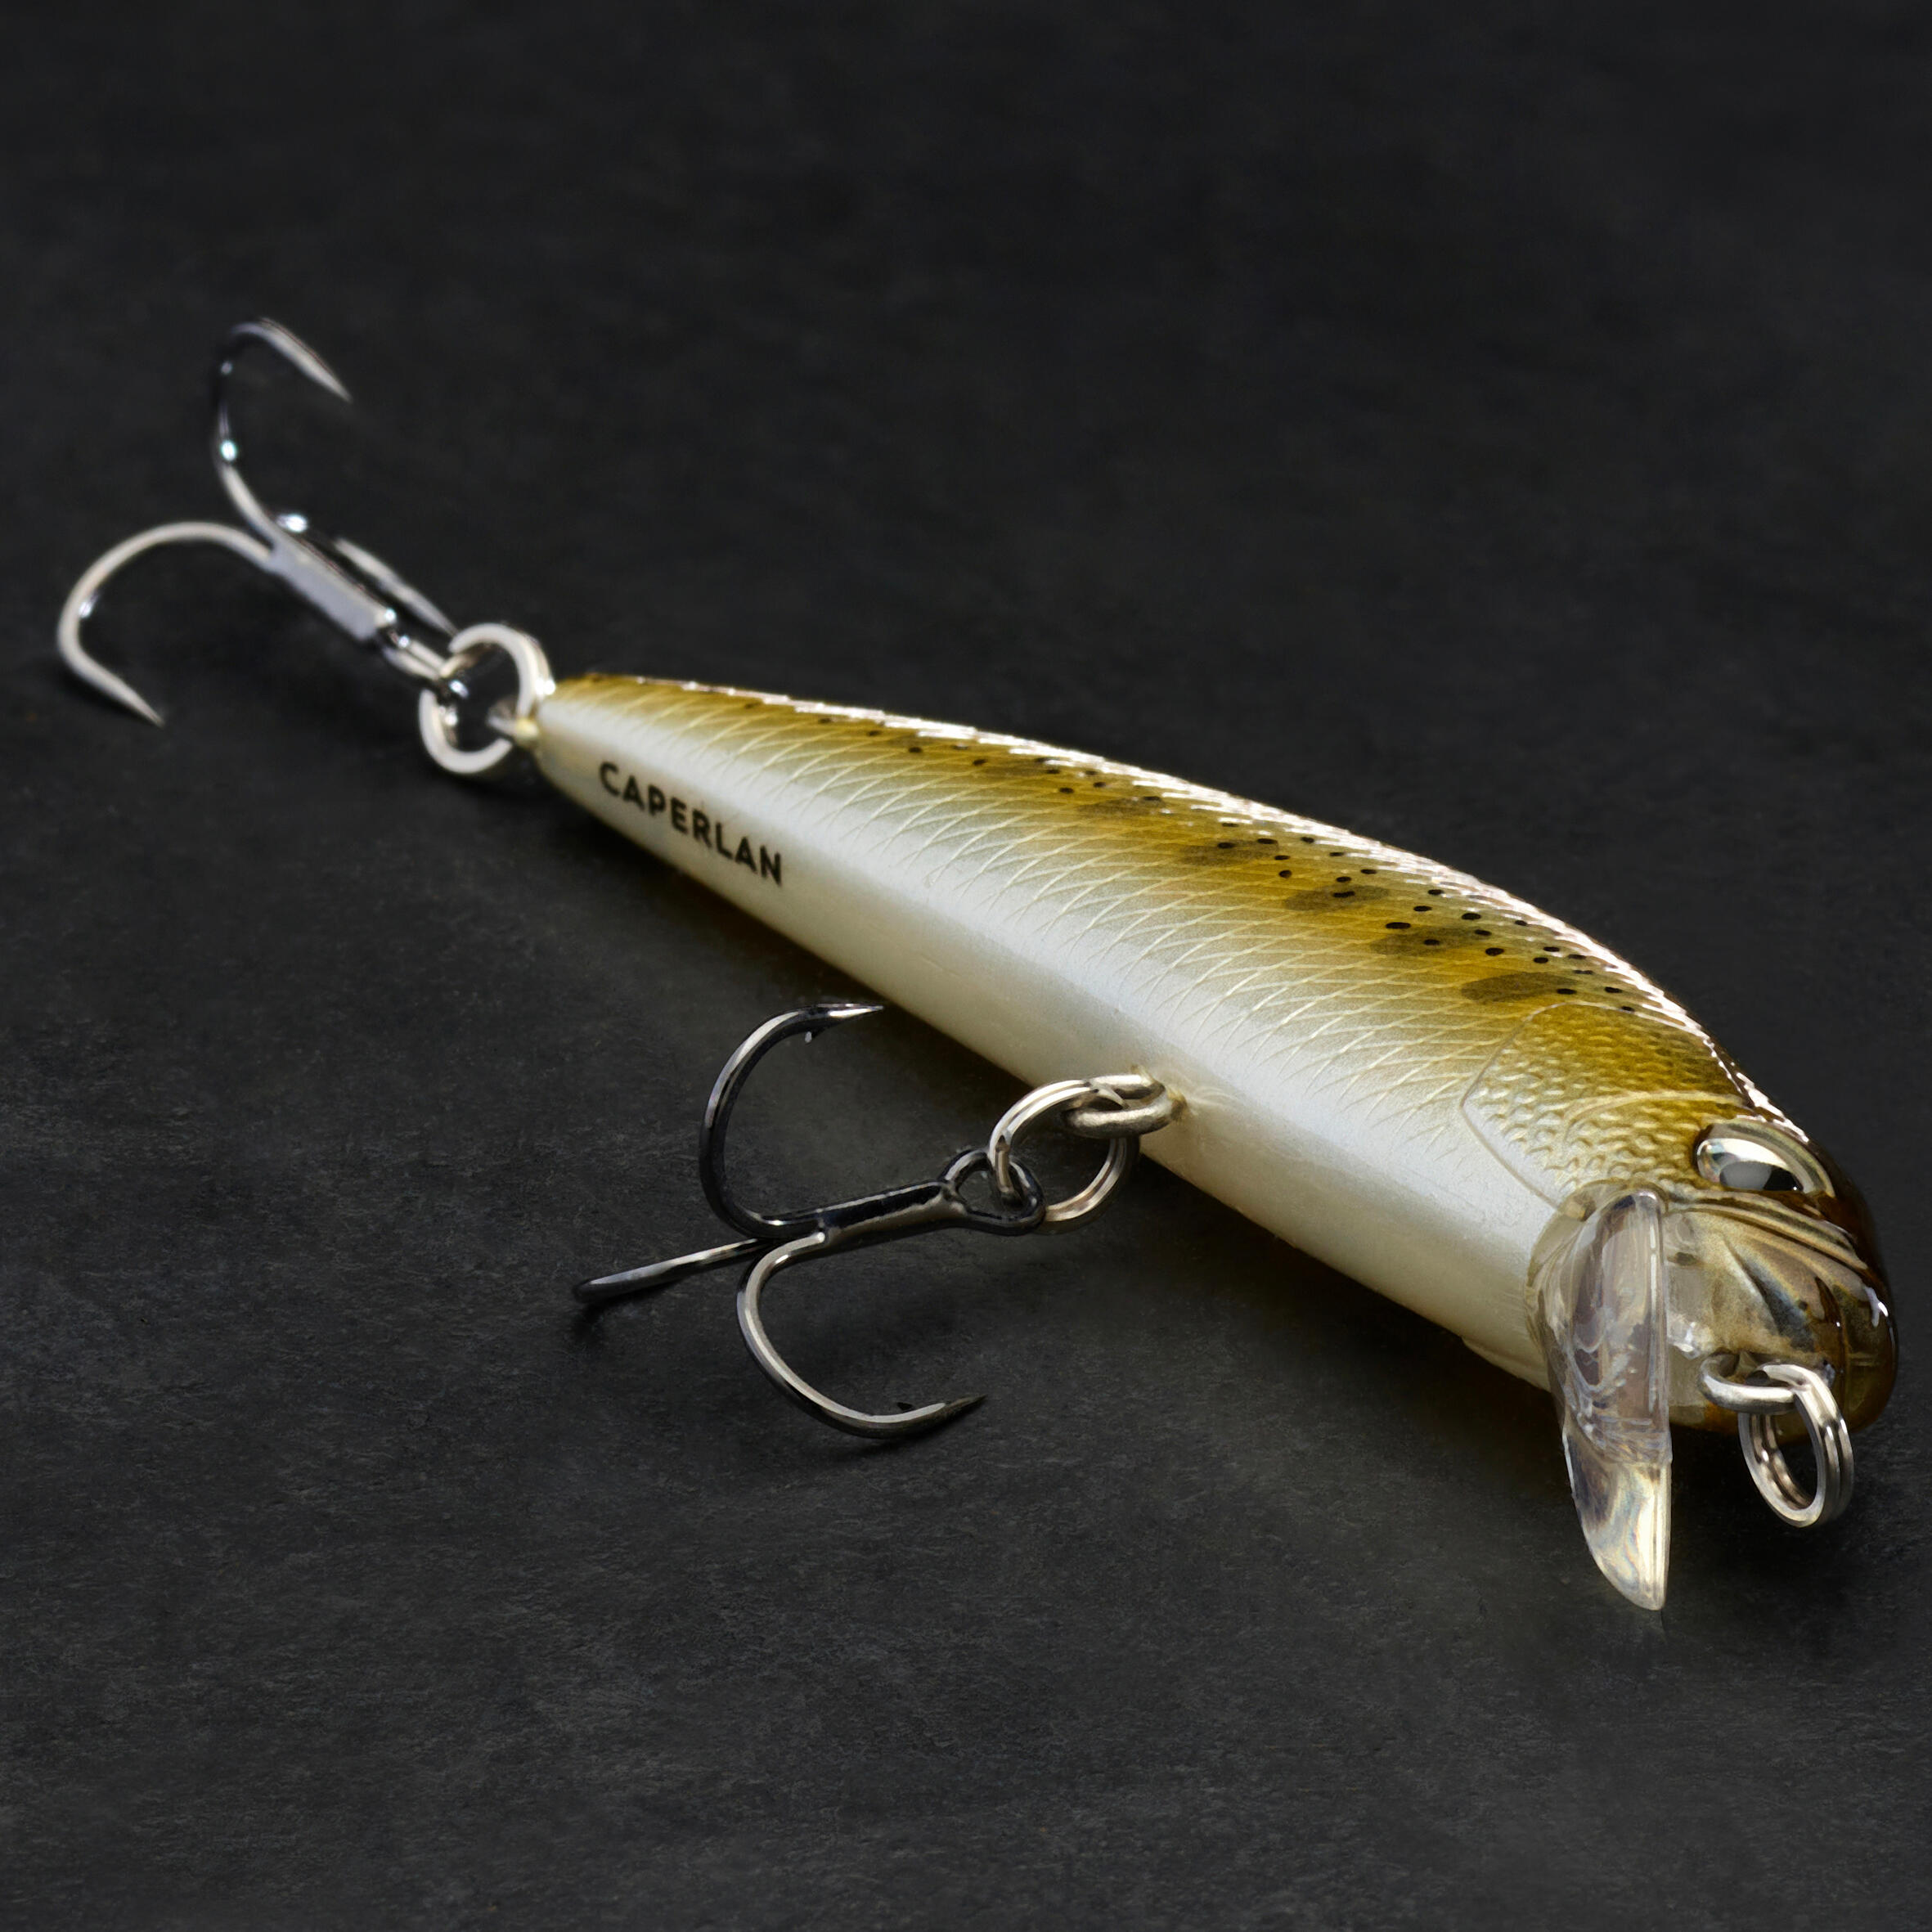 MINNOW HARD LURE FOR TROUT WXM  MNWFS 65 US YAMAME - BROWN 3/4